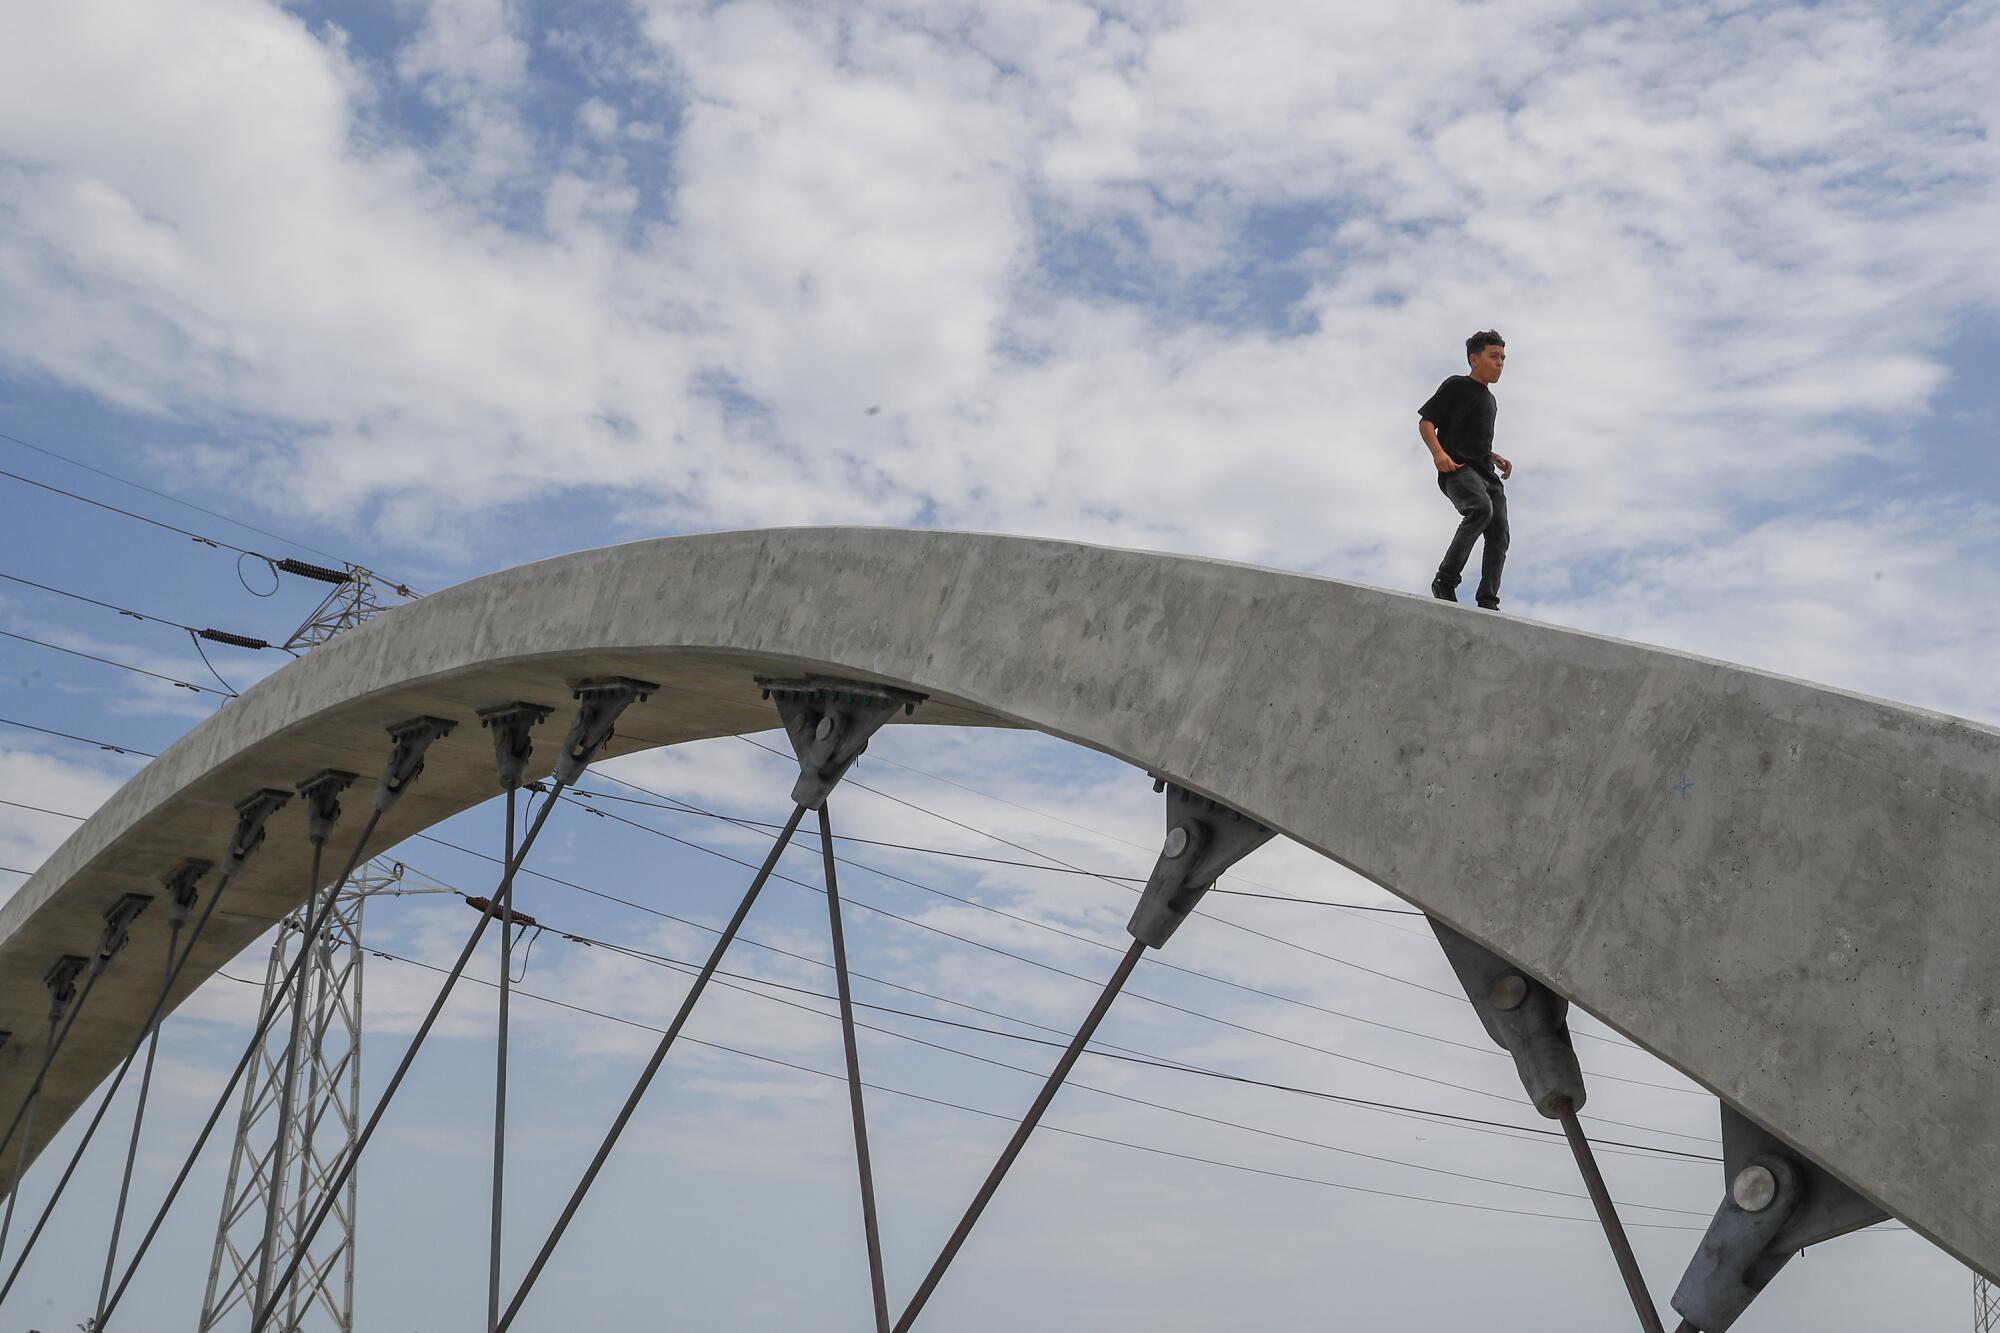 A person climbs on top of one of the arches on the 6th Street Viaduct.